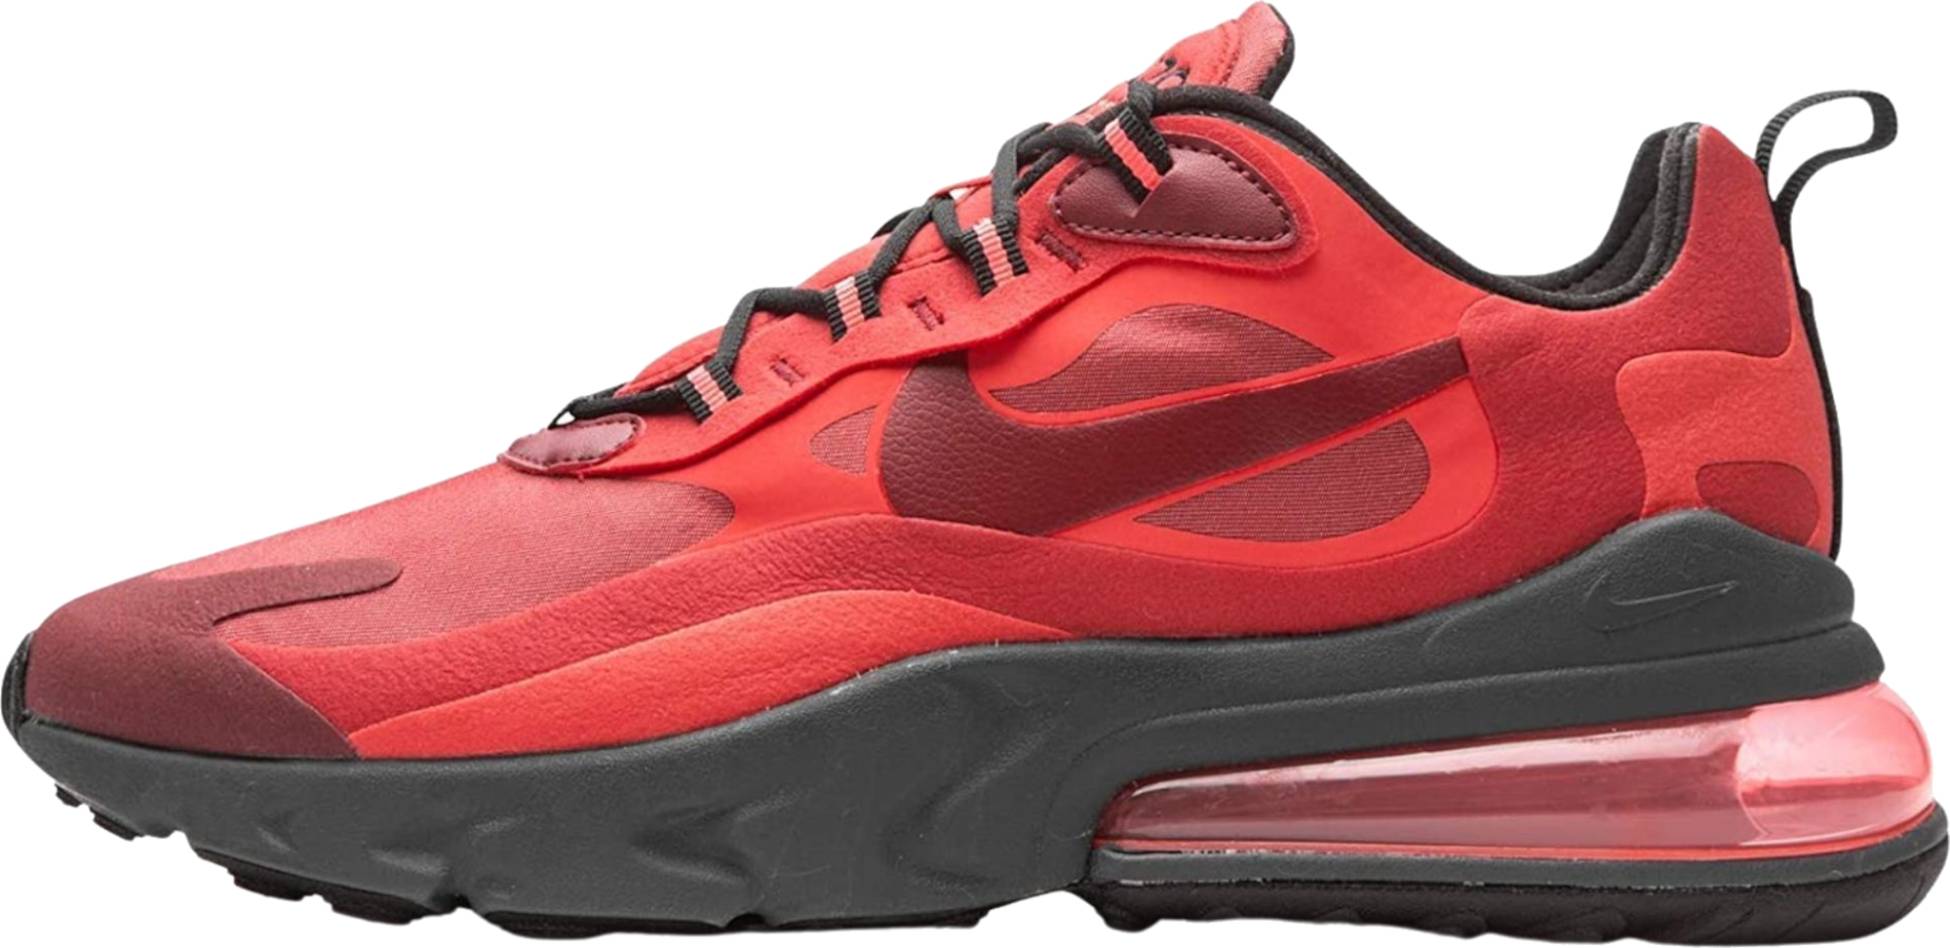 red black nike shoes